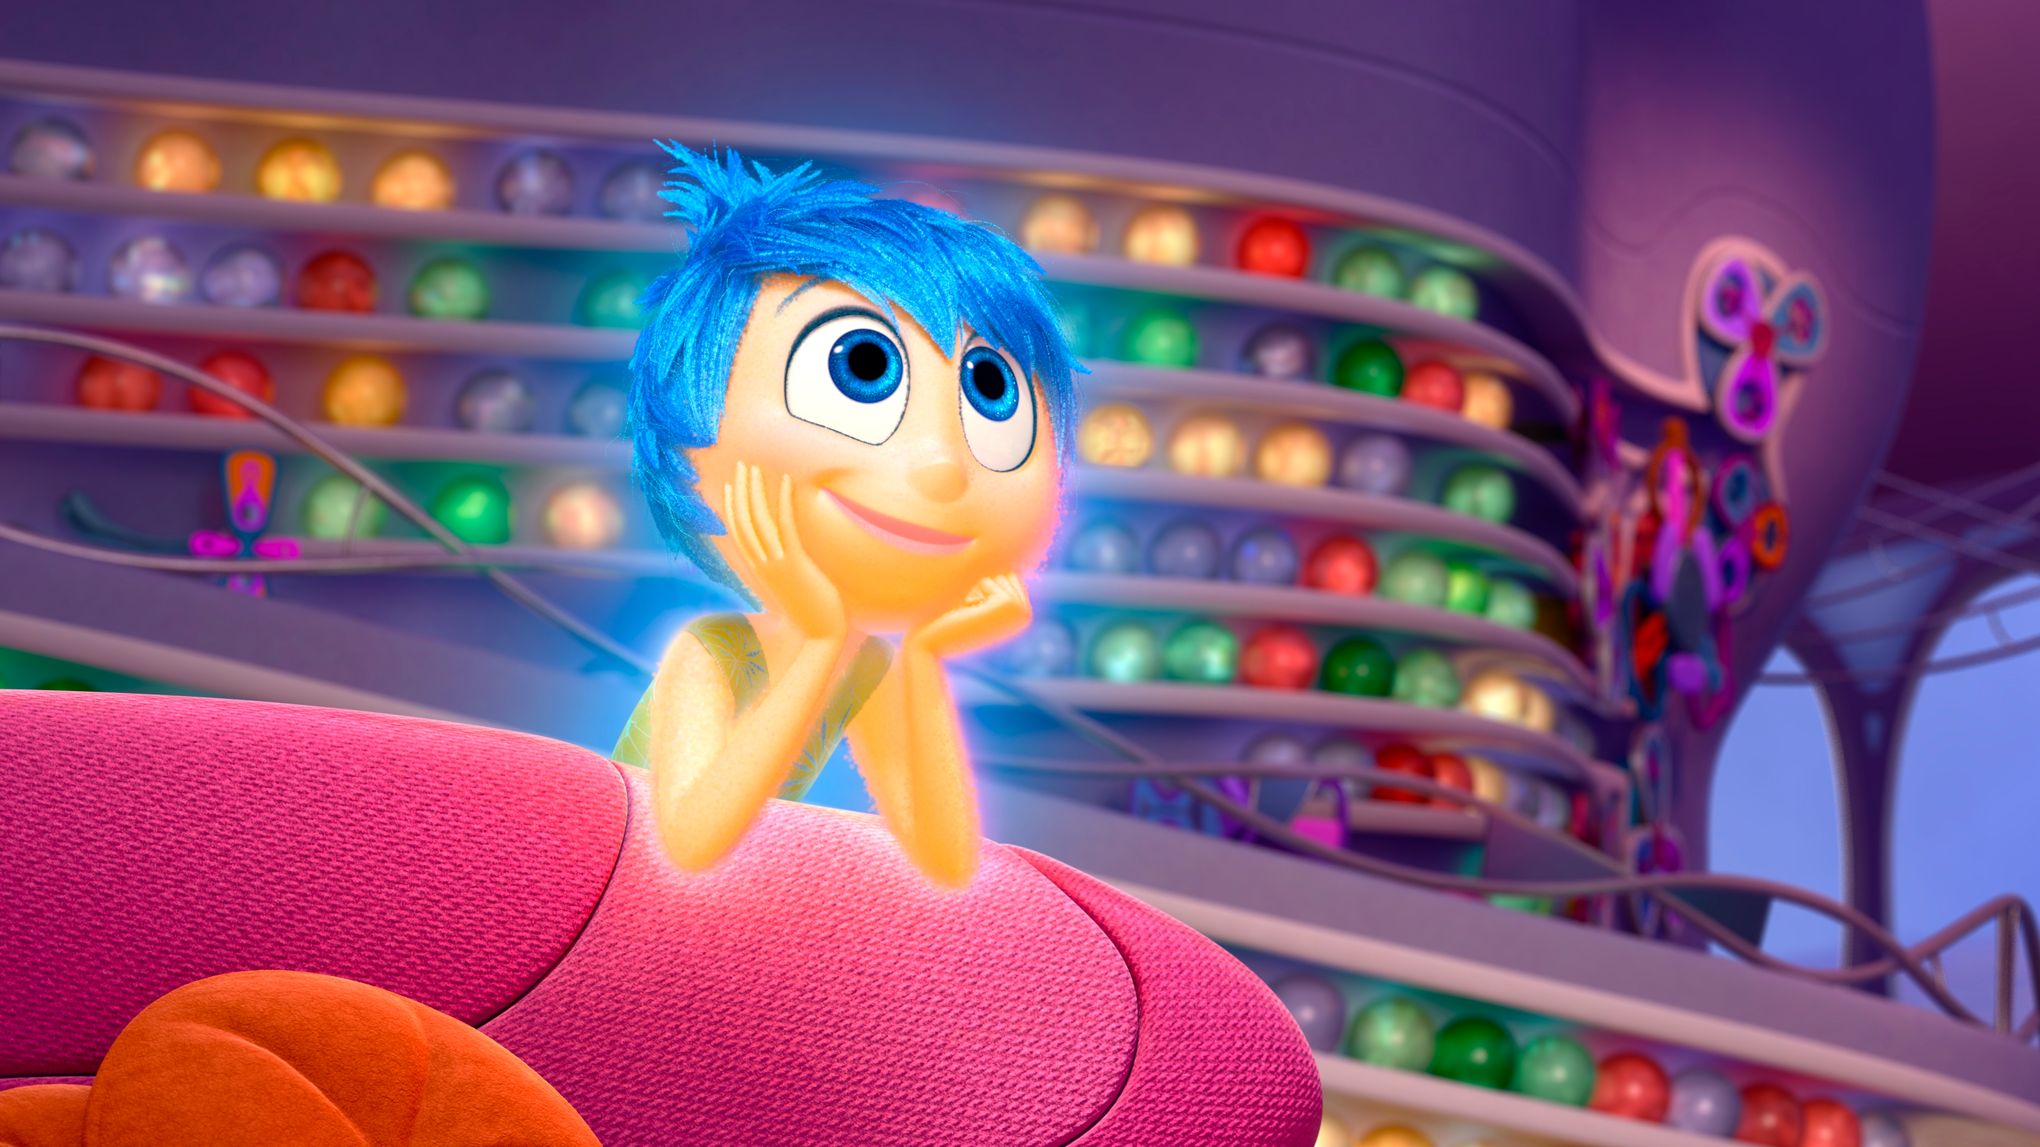 Inside Out: Phyllis Smith had no clue Sadness would be prominent